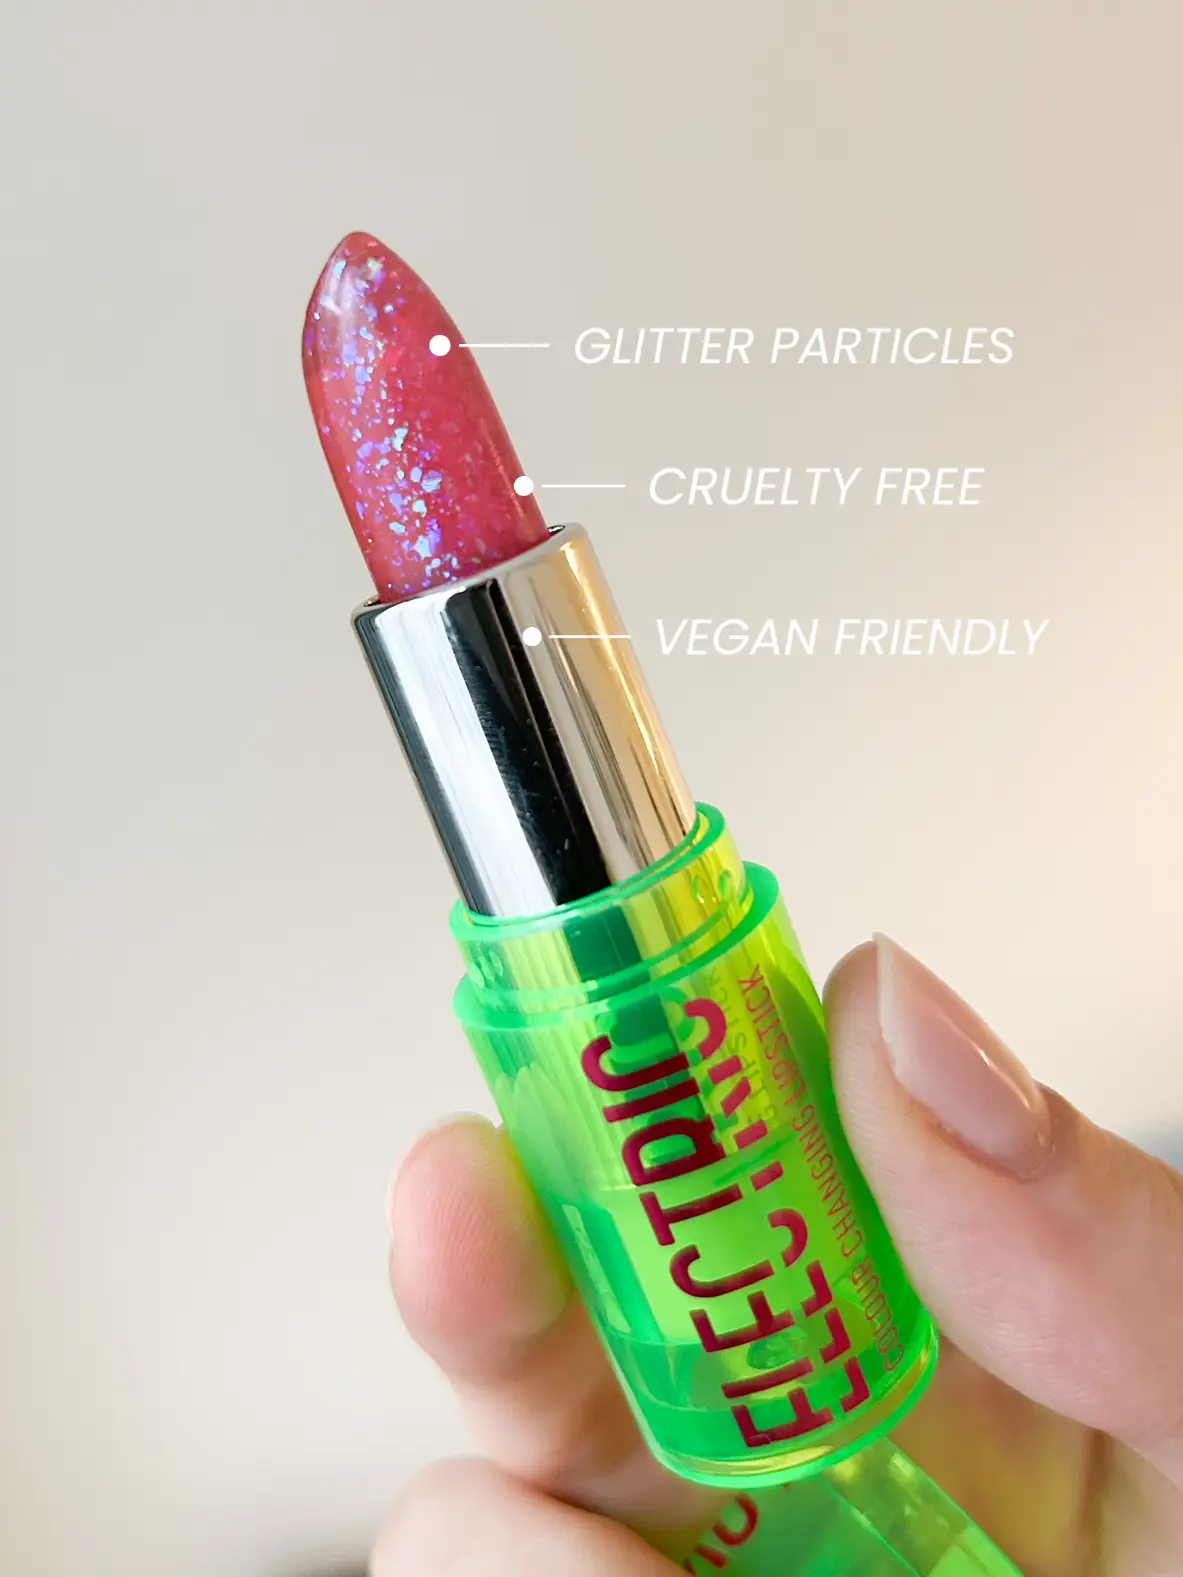 ESSENCE ELECTRIC GLOW Skinbyangela LIPSTICK by CHANGING Gallery | Lemon8 posted COLOUR 💗 